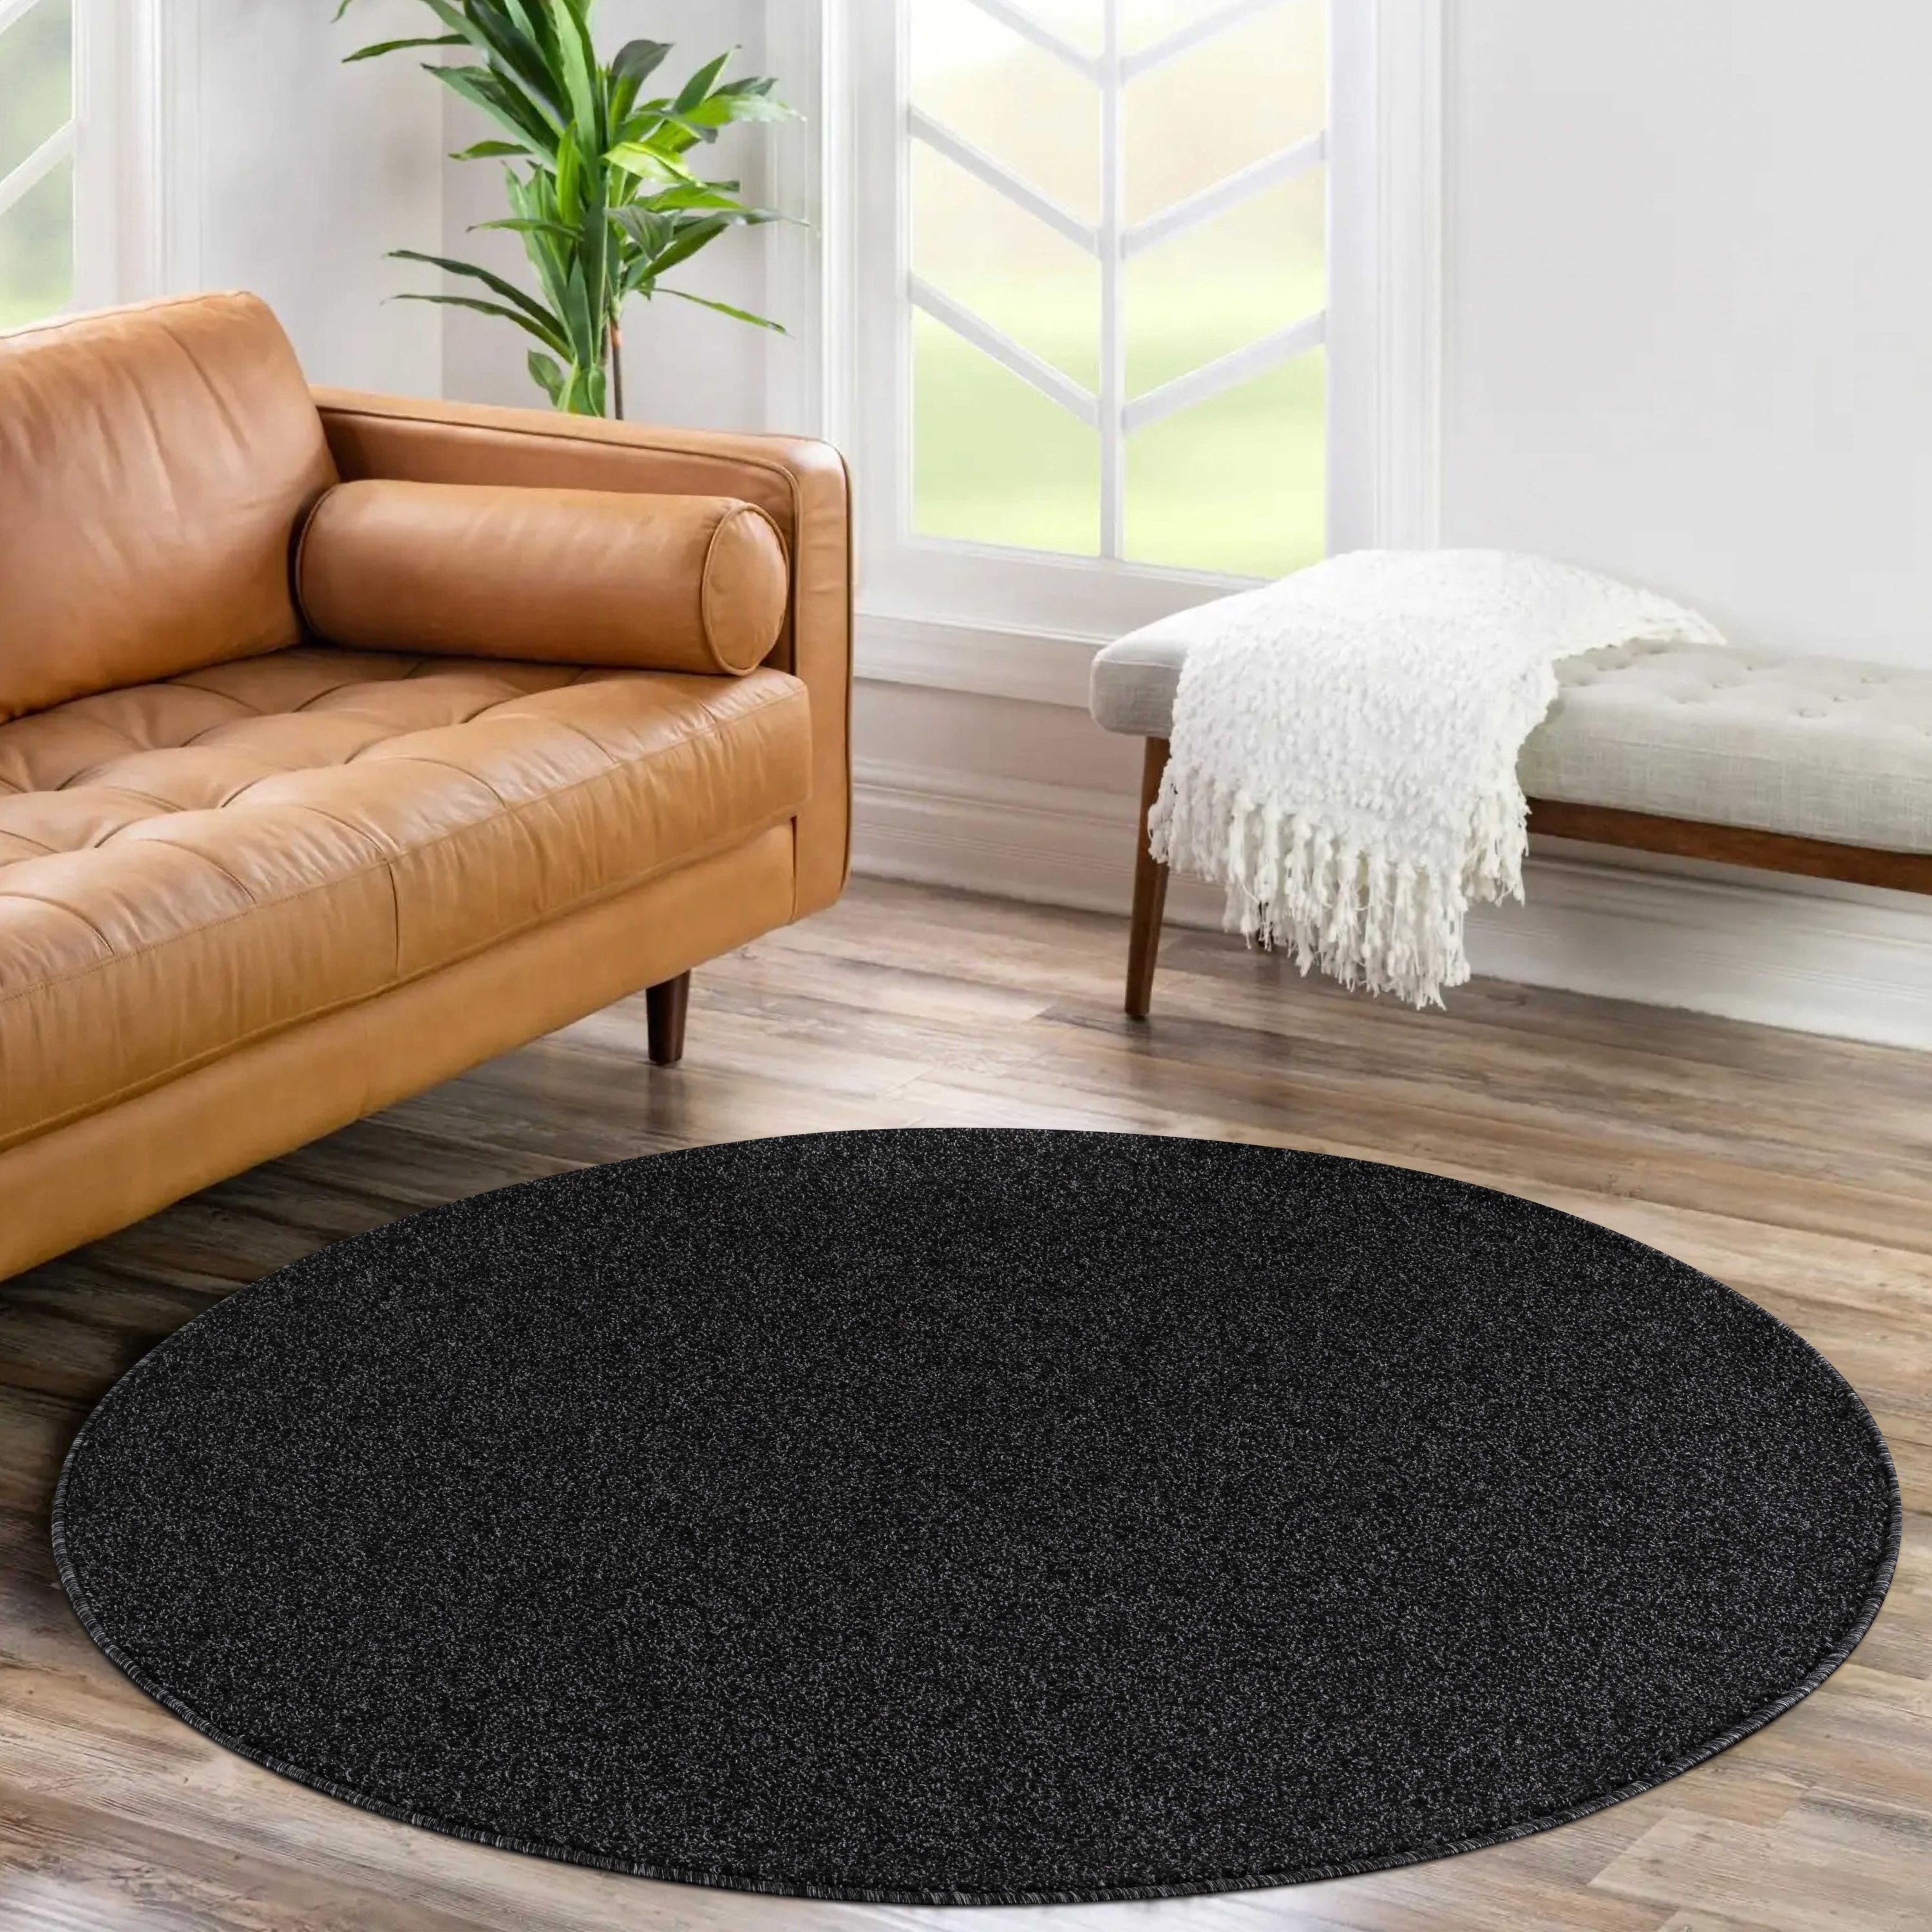 Plain short pile round rug for living room in various colors and sizes